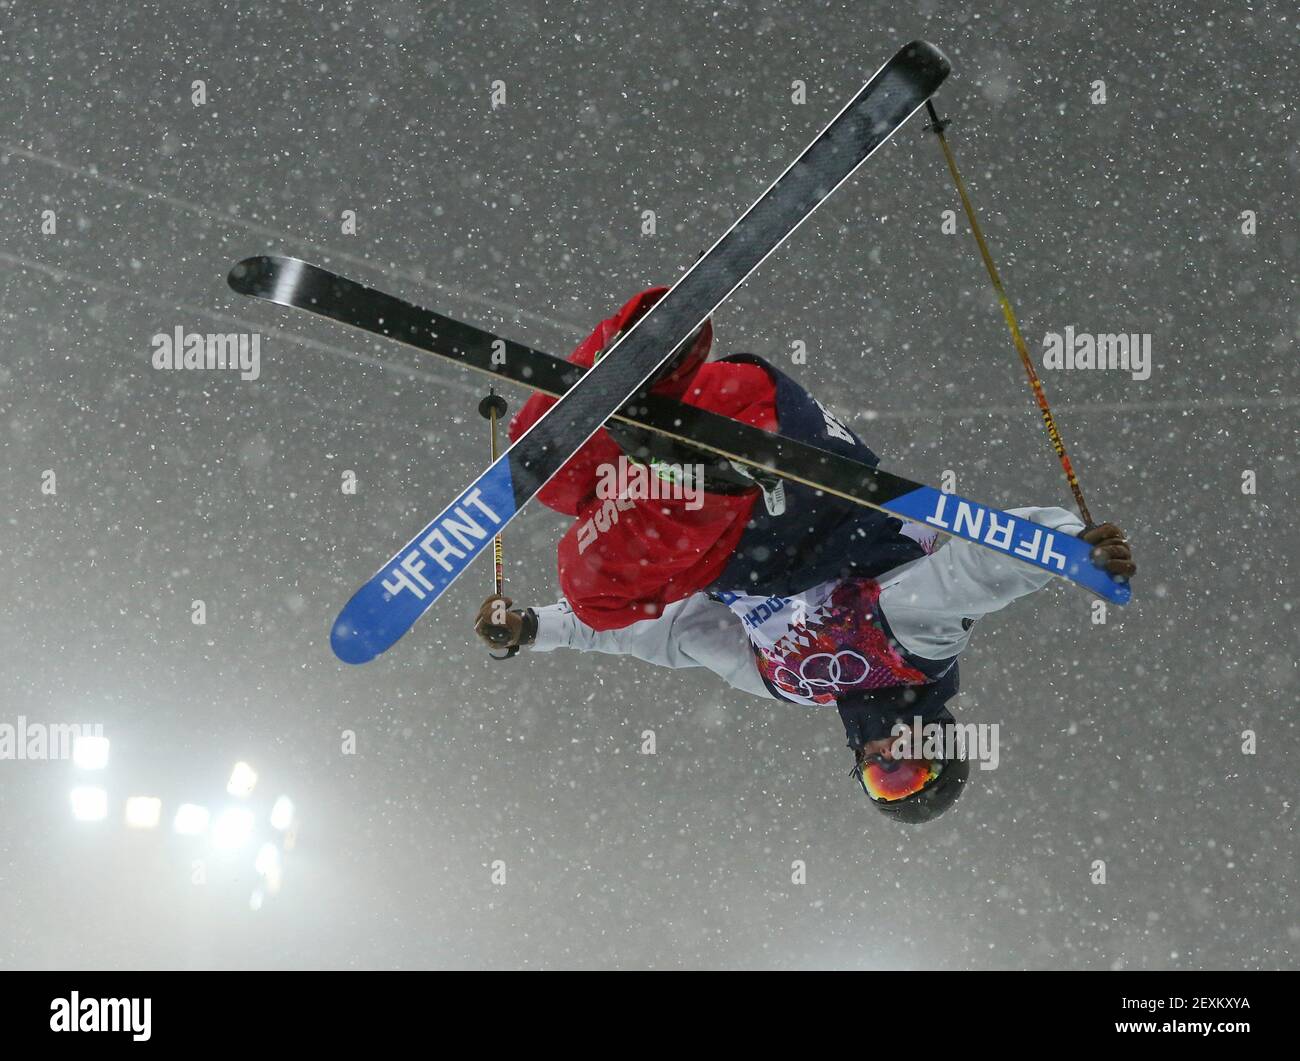 David Wise of the USA competes in qualifying for the men's ski halfpipe at Rosa Khutor Extreme Park during the Winter Olympics in Sochi, Russia, Tuesday, Feb. 18, 2014. (Photo by Brian Cassella/Chicago Tribune/MCT/Sipa USA) Stock Photo